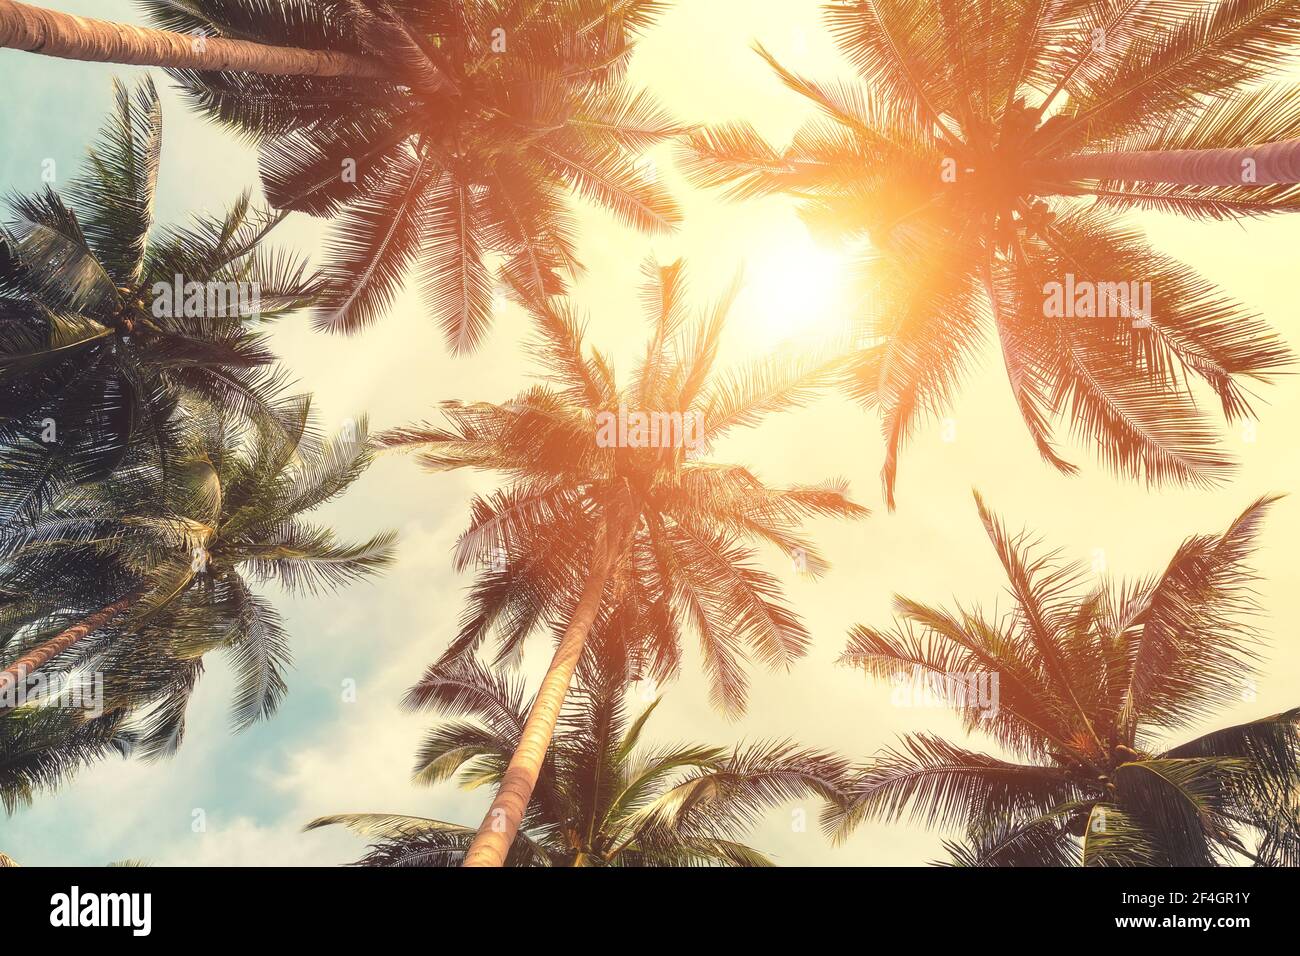 Beautiful tropical beach background. Coconut palm trees and cloud over blue sky in vintage tone. Summer vacation background concept. Stock Photo